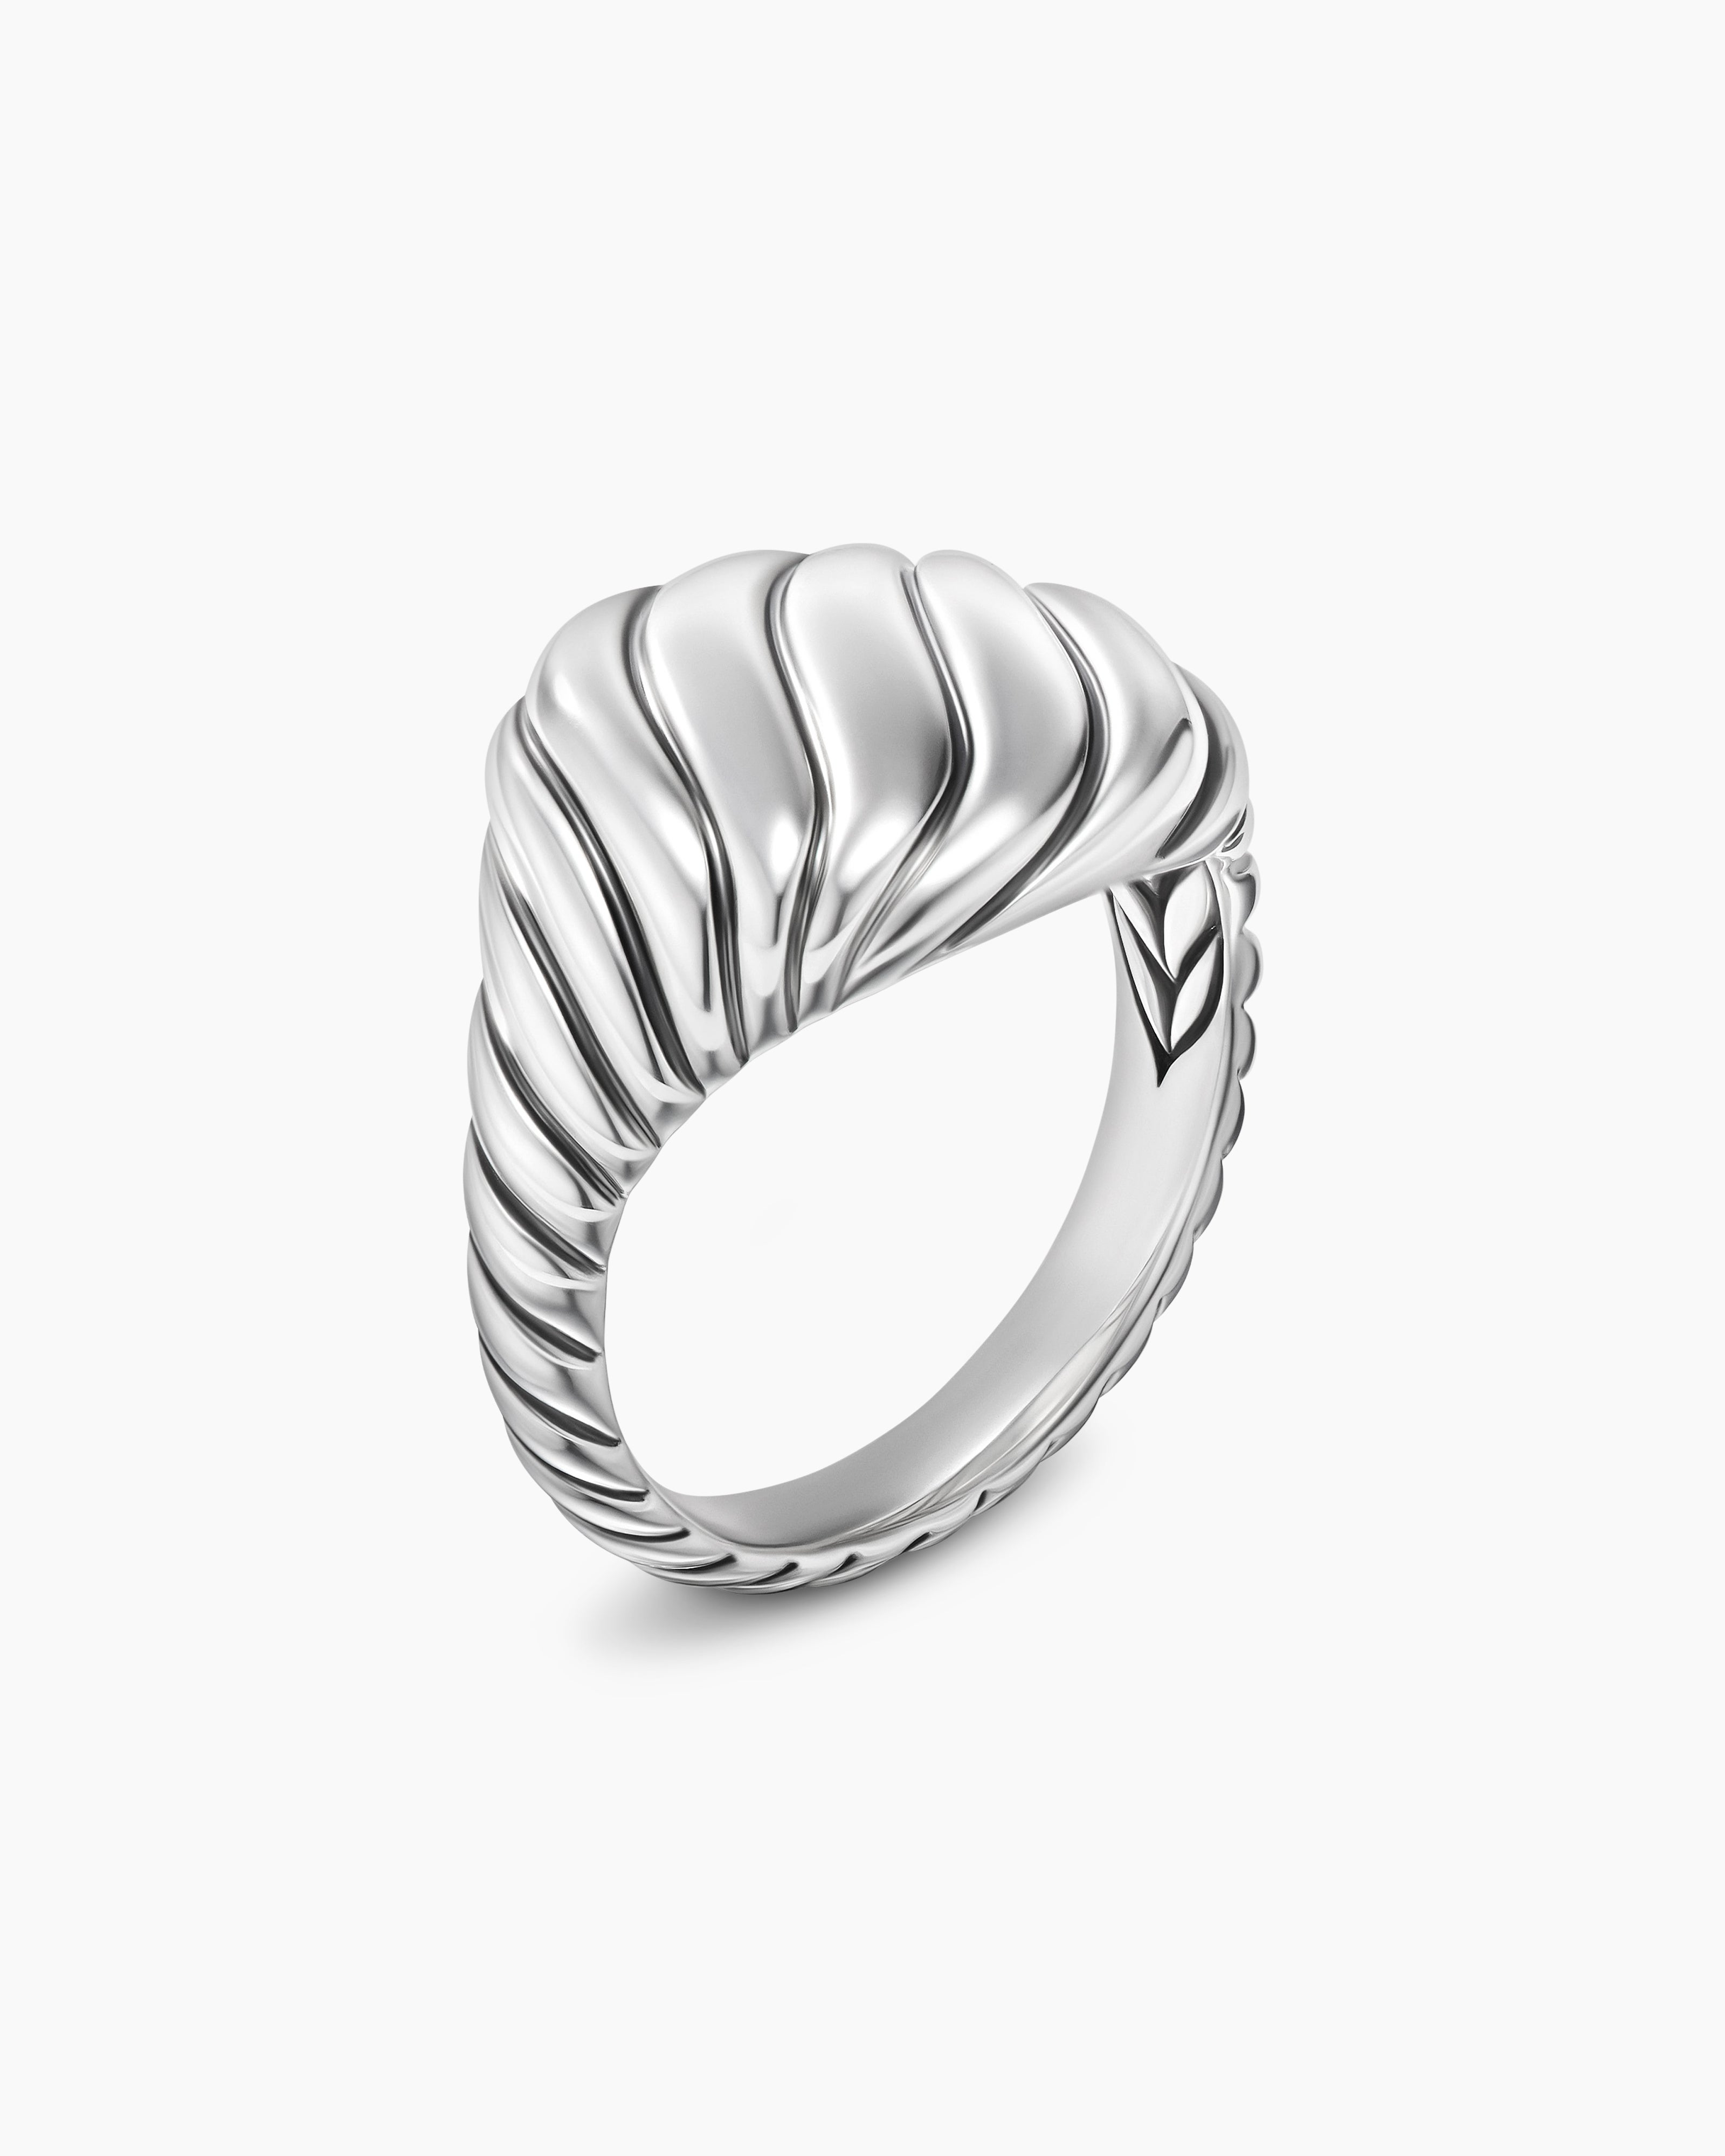 David Yurman DY Initial Pinky Ring in Sterling Silver with Diamonds